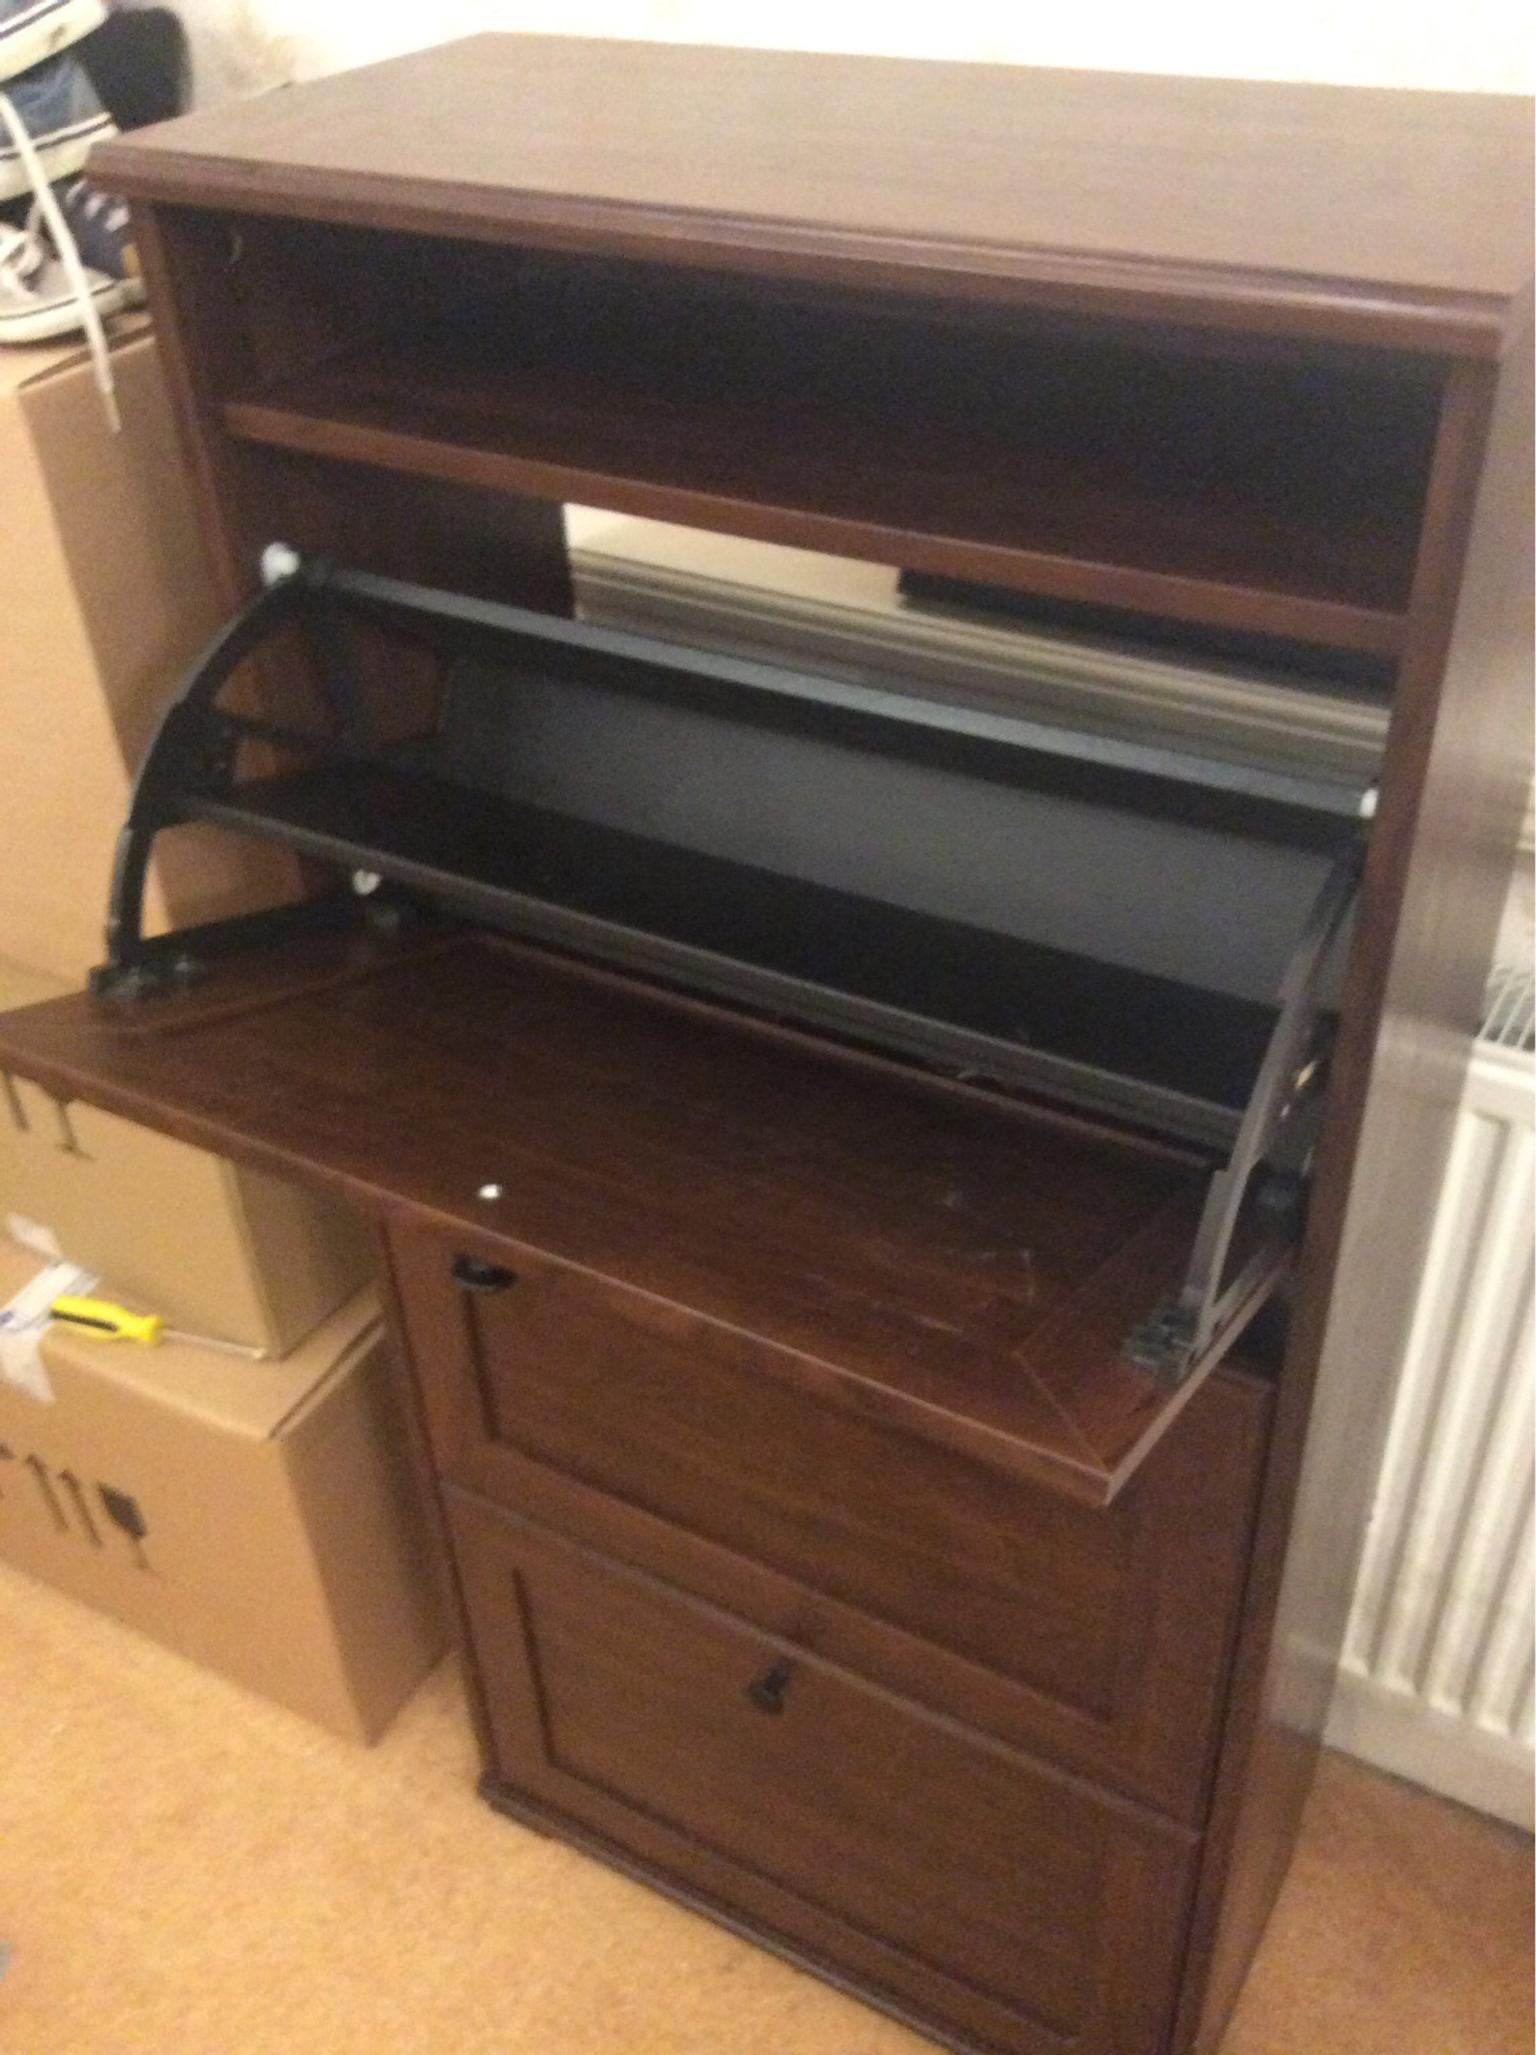 Ikea Shoe Cabinet In Sm5 Carshalton For 30 00 For Sale Shpock